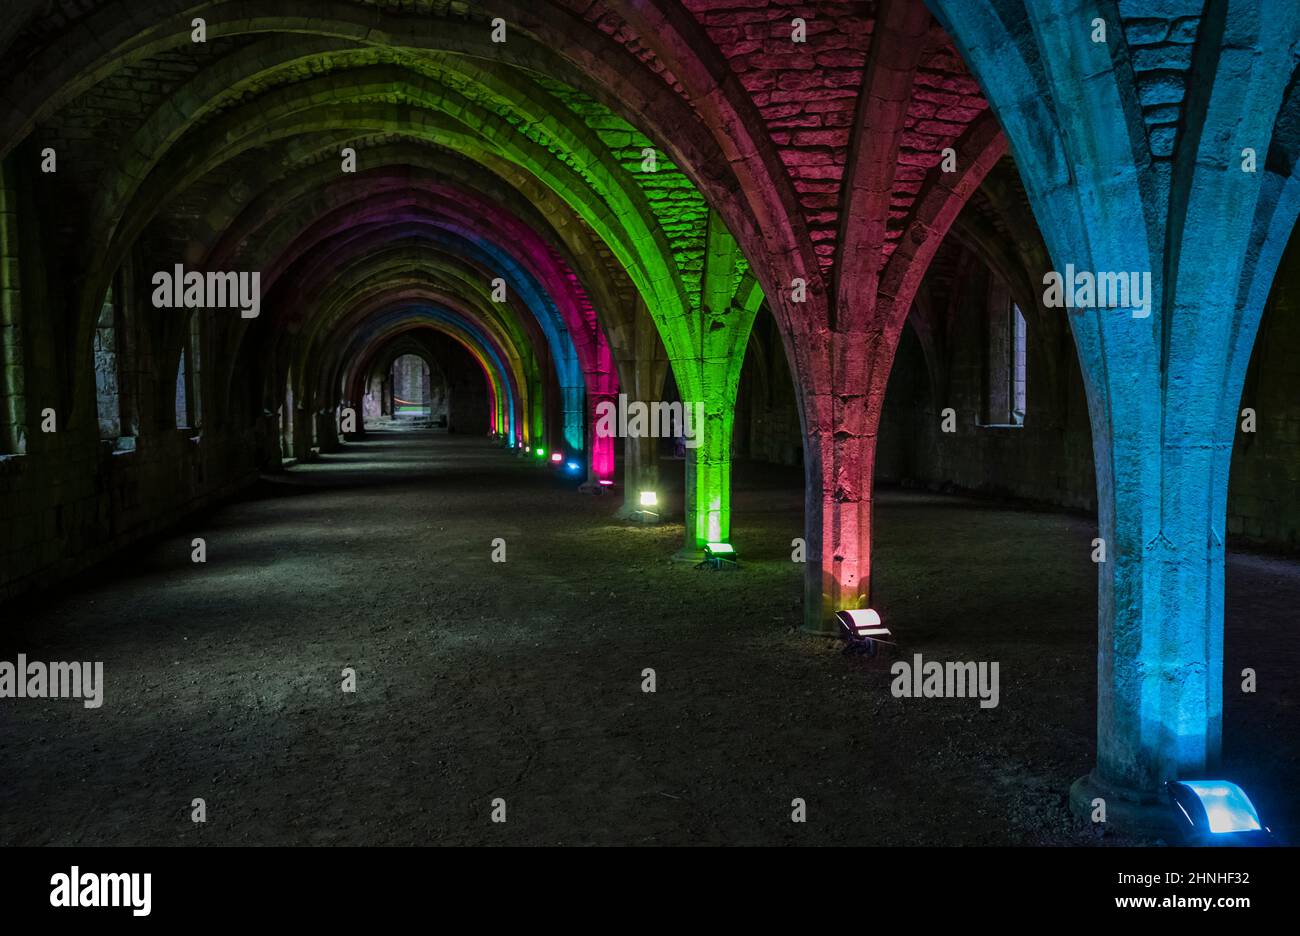 Floodlit cloisters at Fountains Abbey, Yorkshire, UK Stock Photo